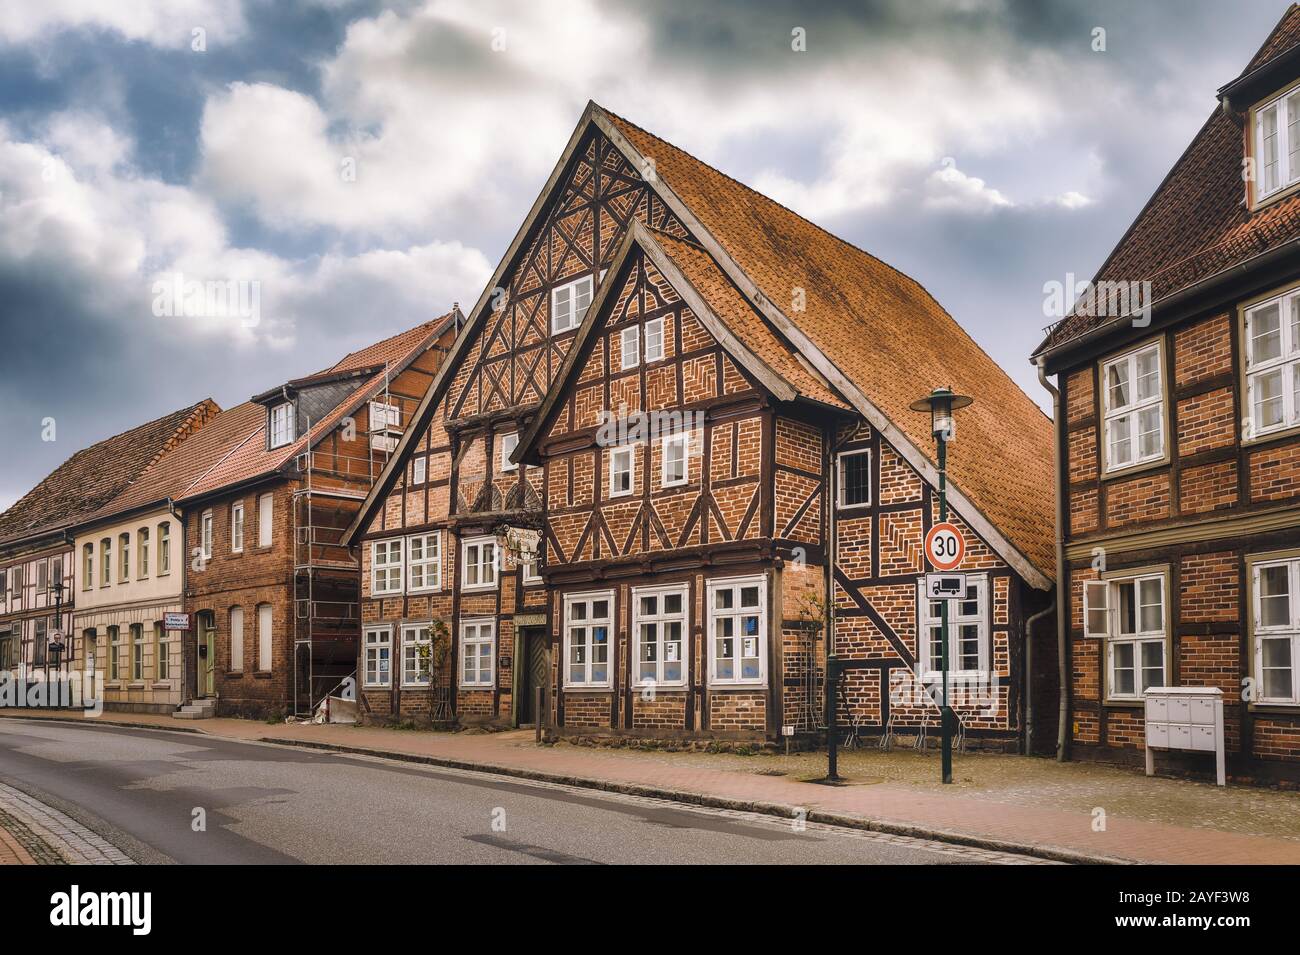 Old half-timbered houses on the main street Stock Photo